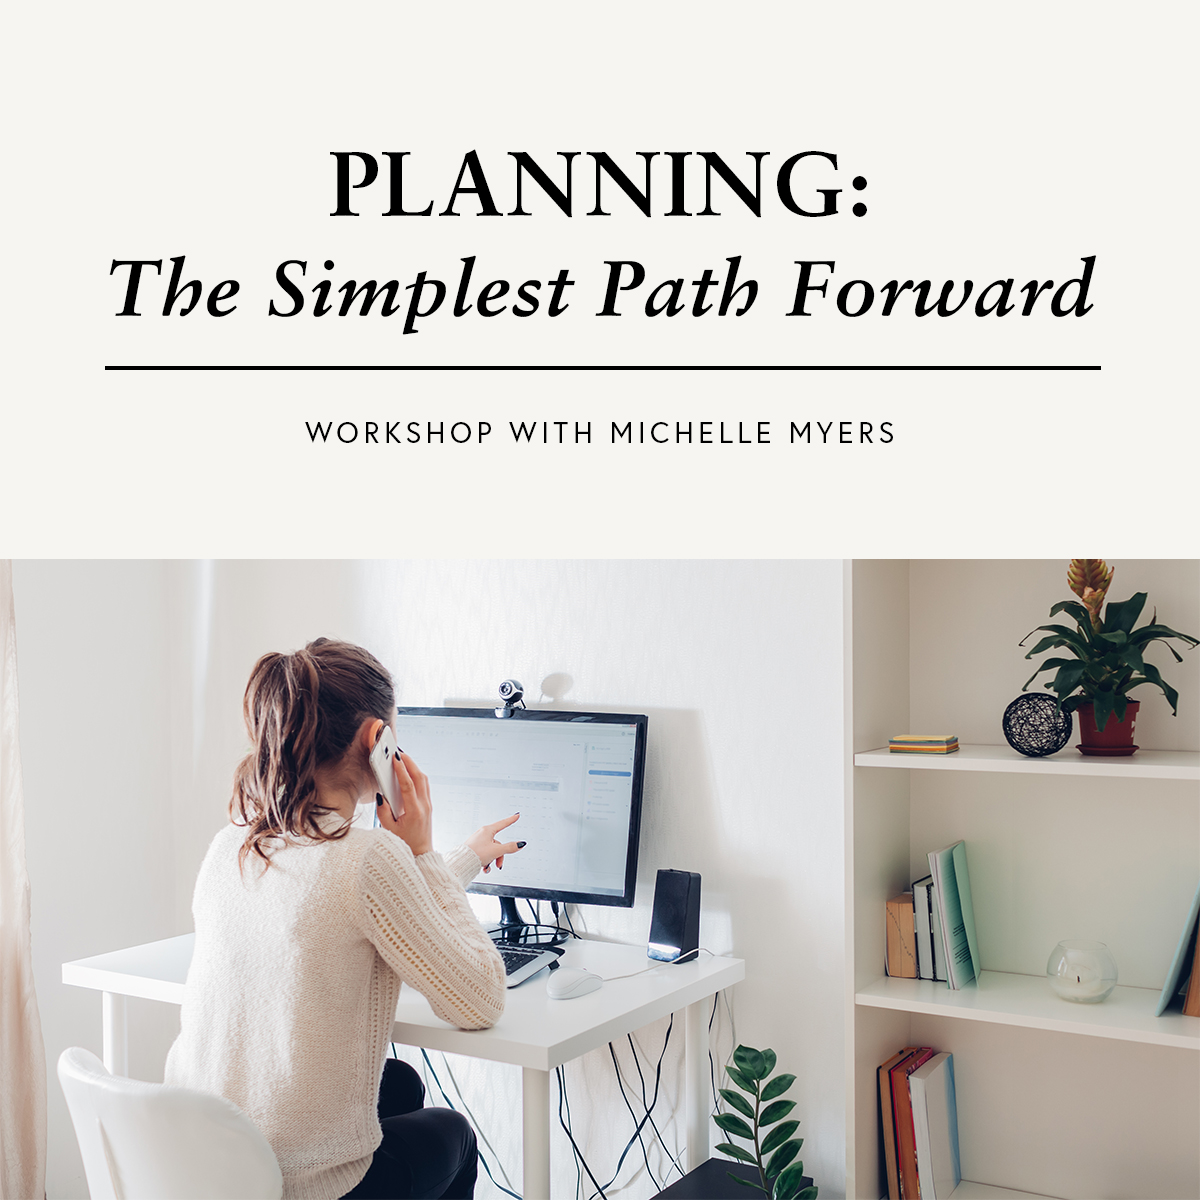 Planning: The Simplest Path Forward